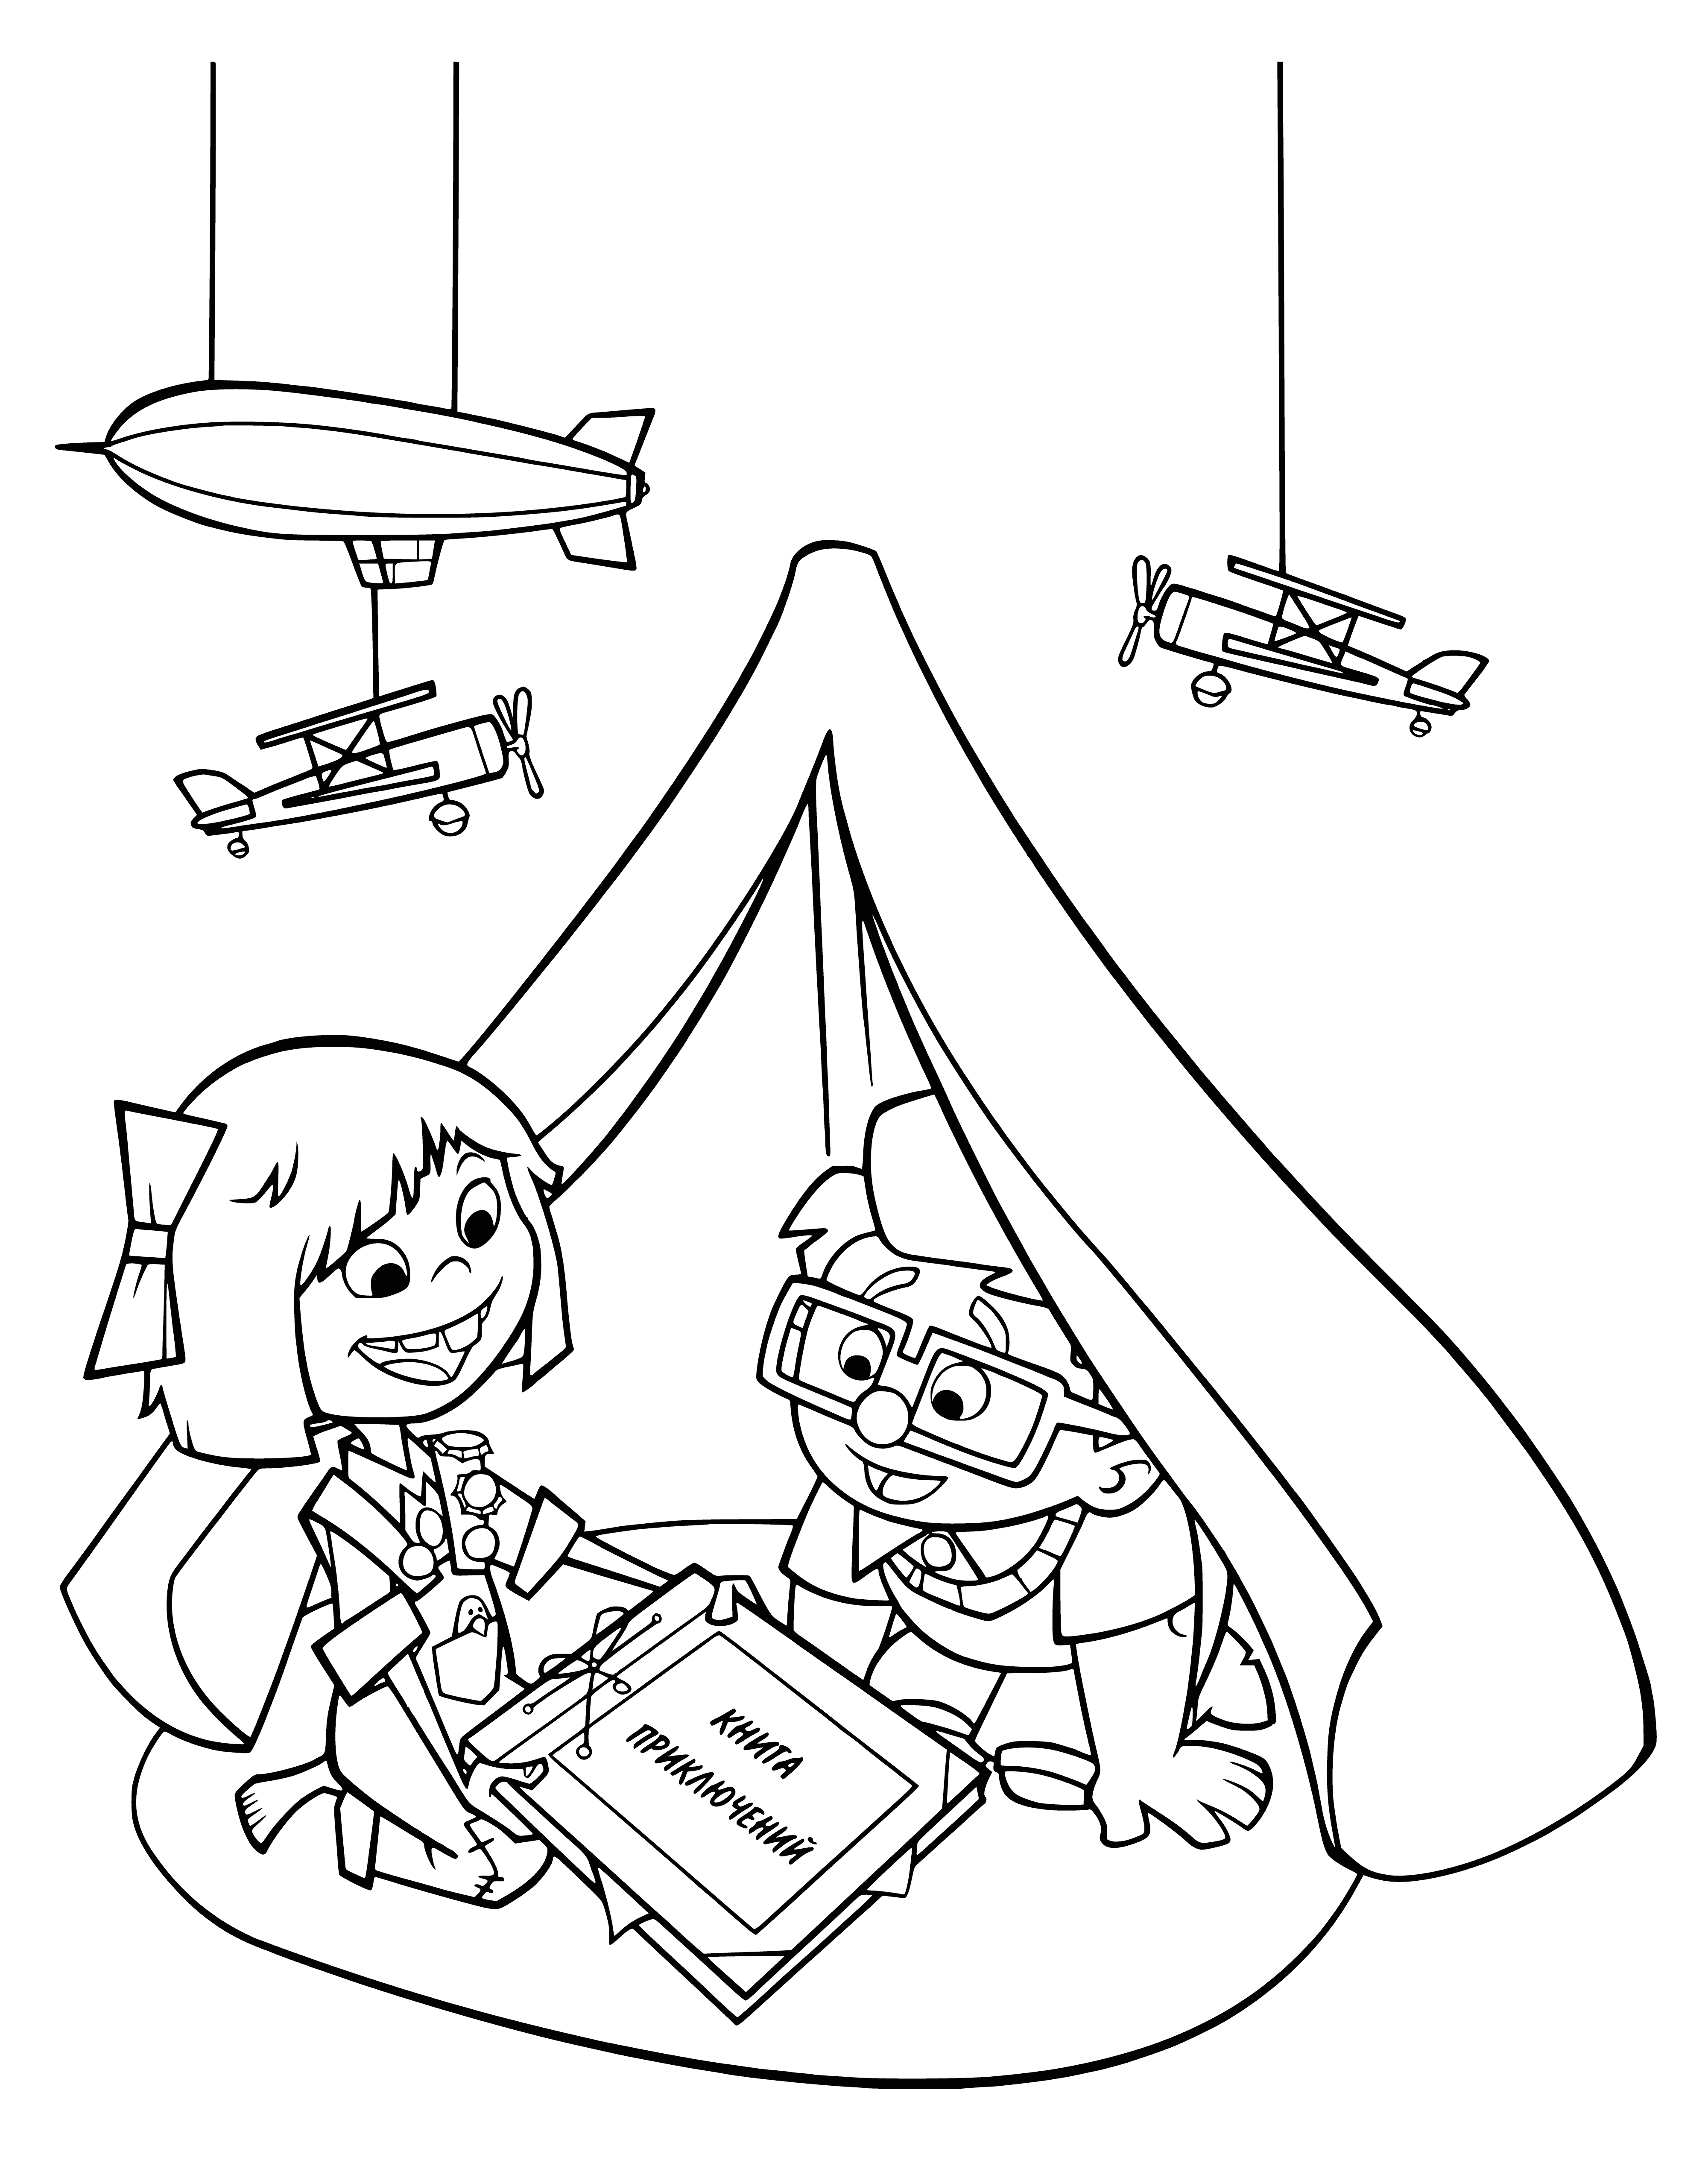 coloring page: Kids excitedly pointing at a coloring page of a red, white, and blue hot air balloon with a basket.